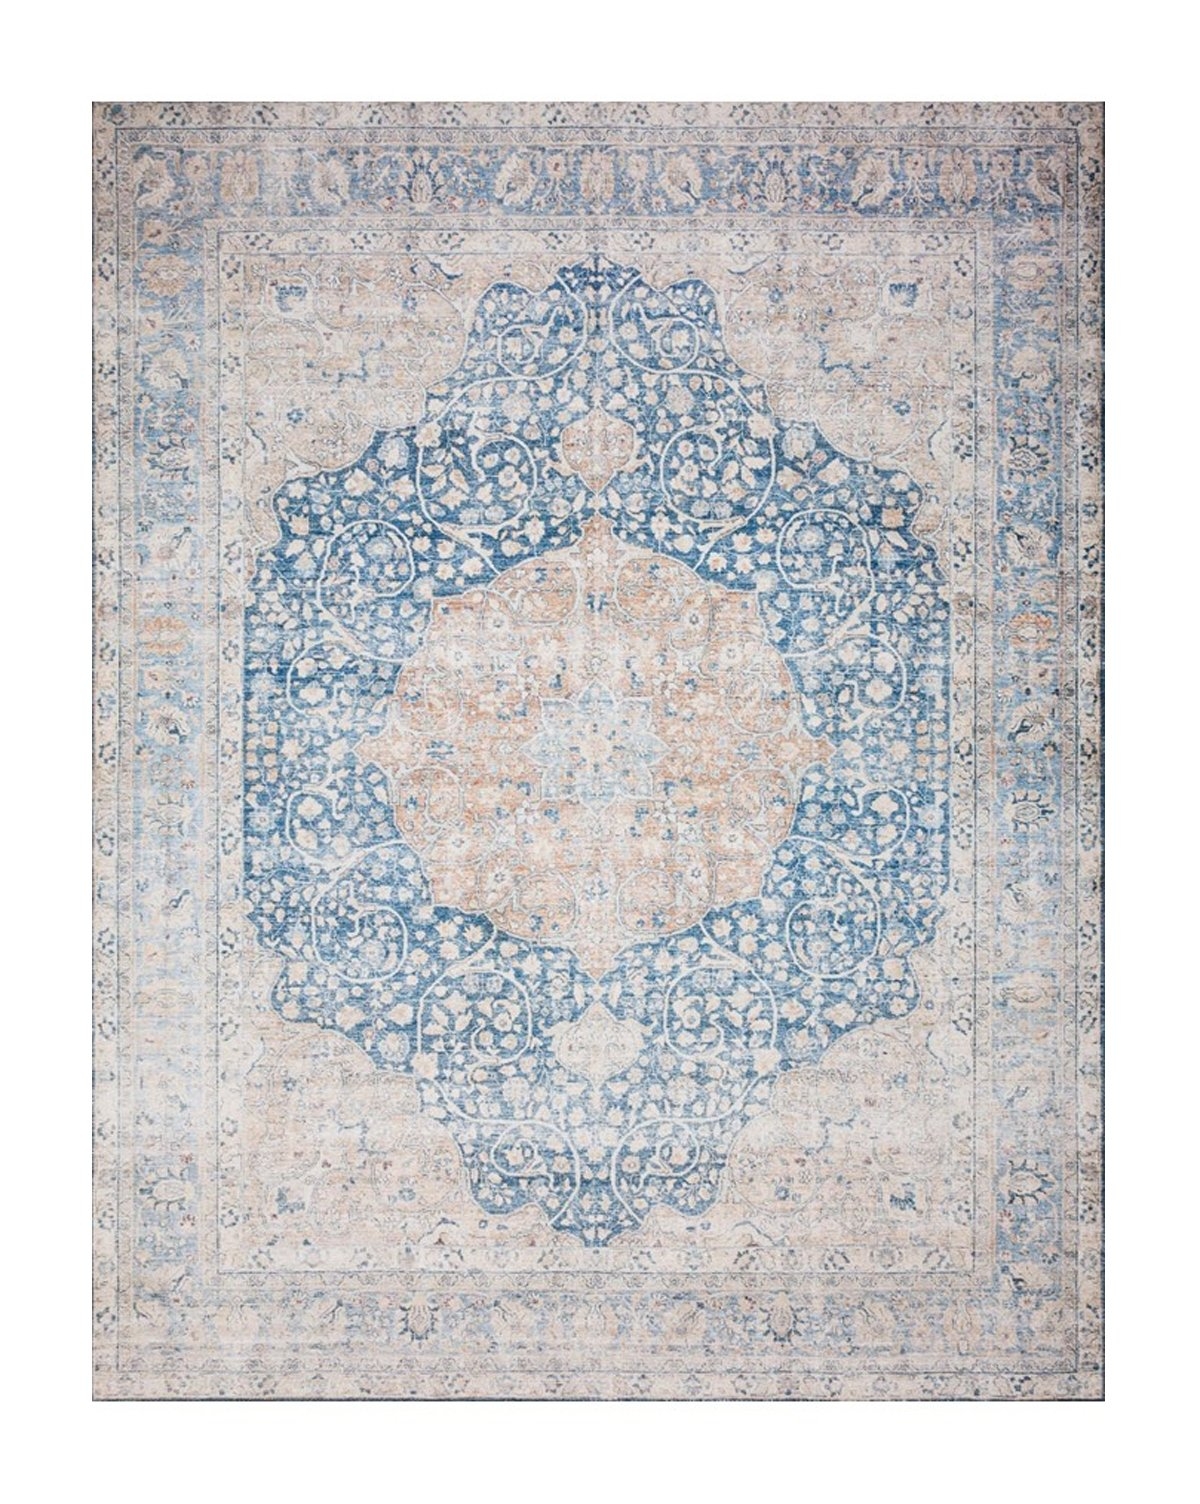 WHITLEY PATTERNED RUG, 7'6" x 9'6" - Image 0